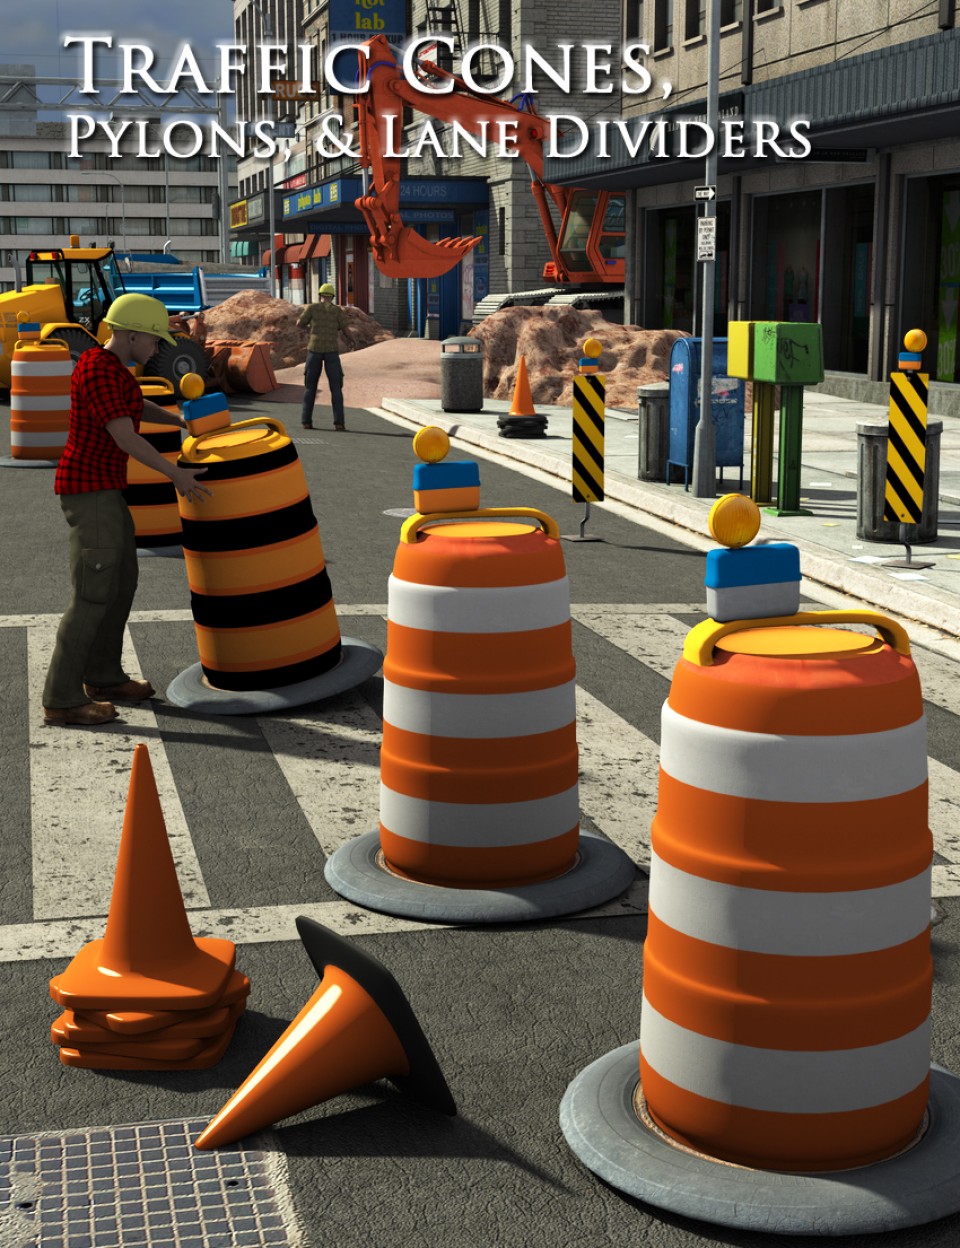 Traffic Cones, Pylons, and Lane Dividers_DAZ3DDL